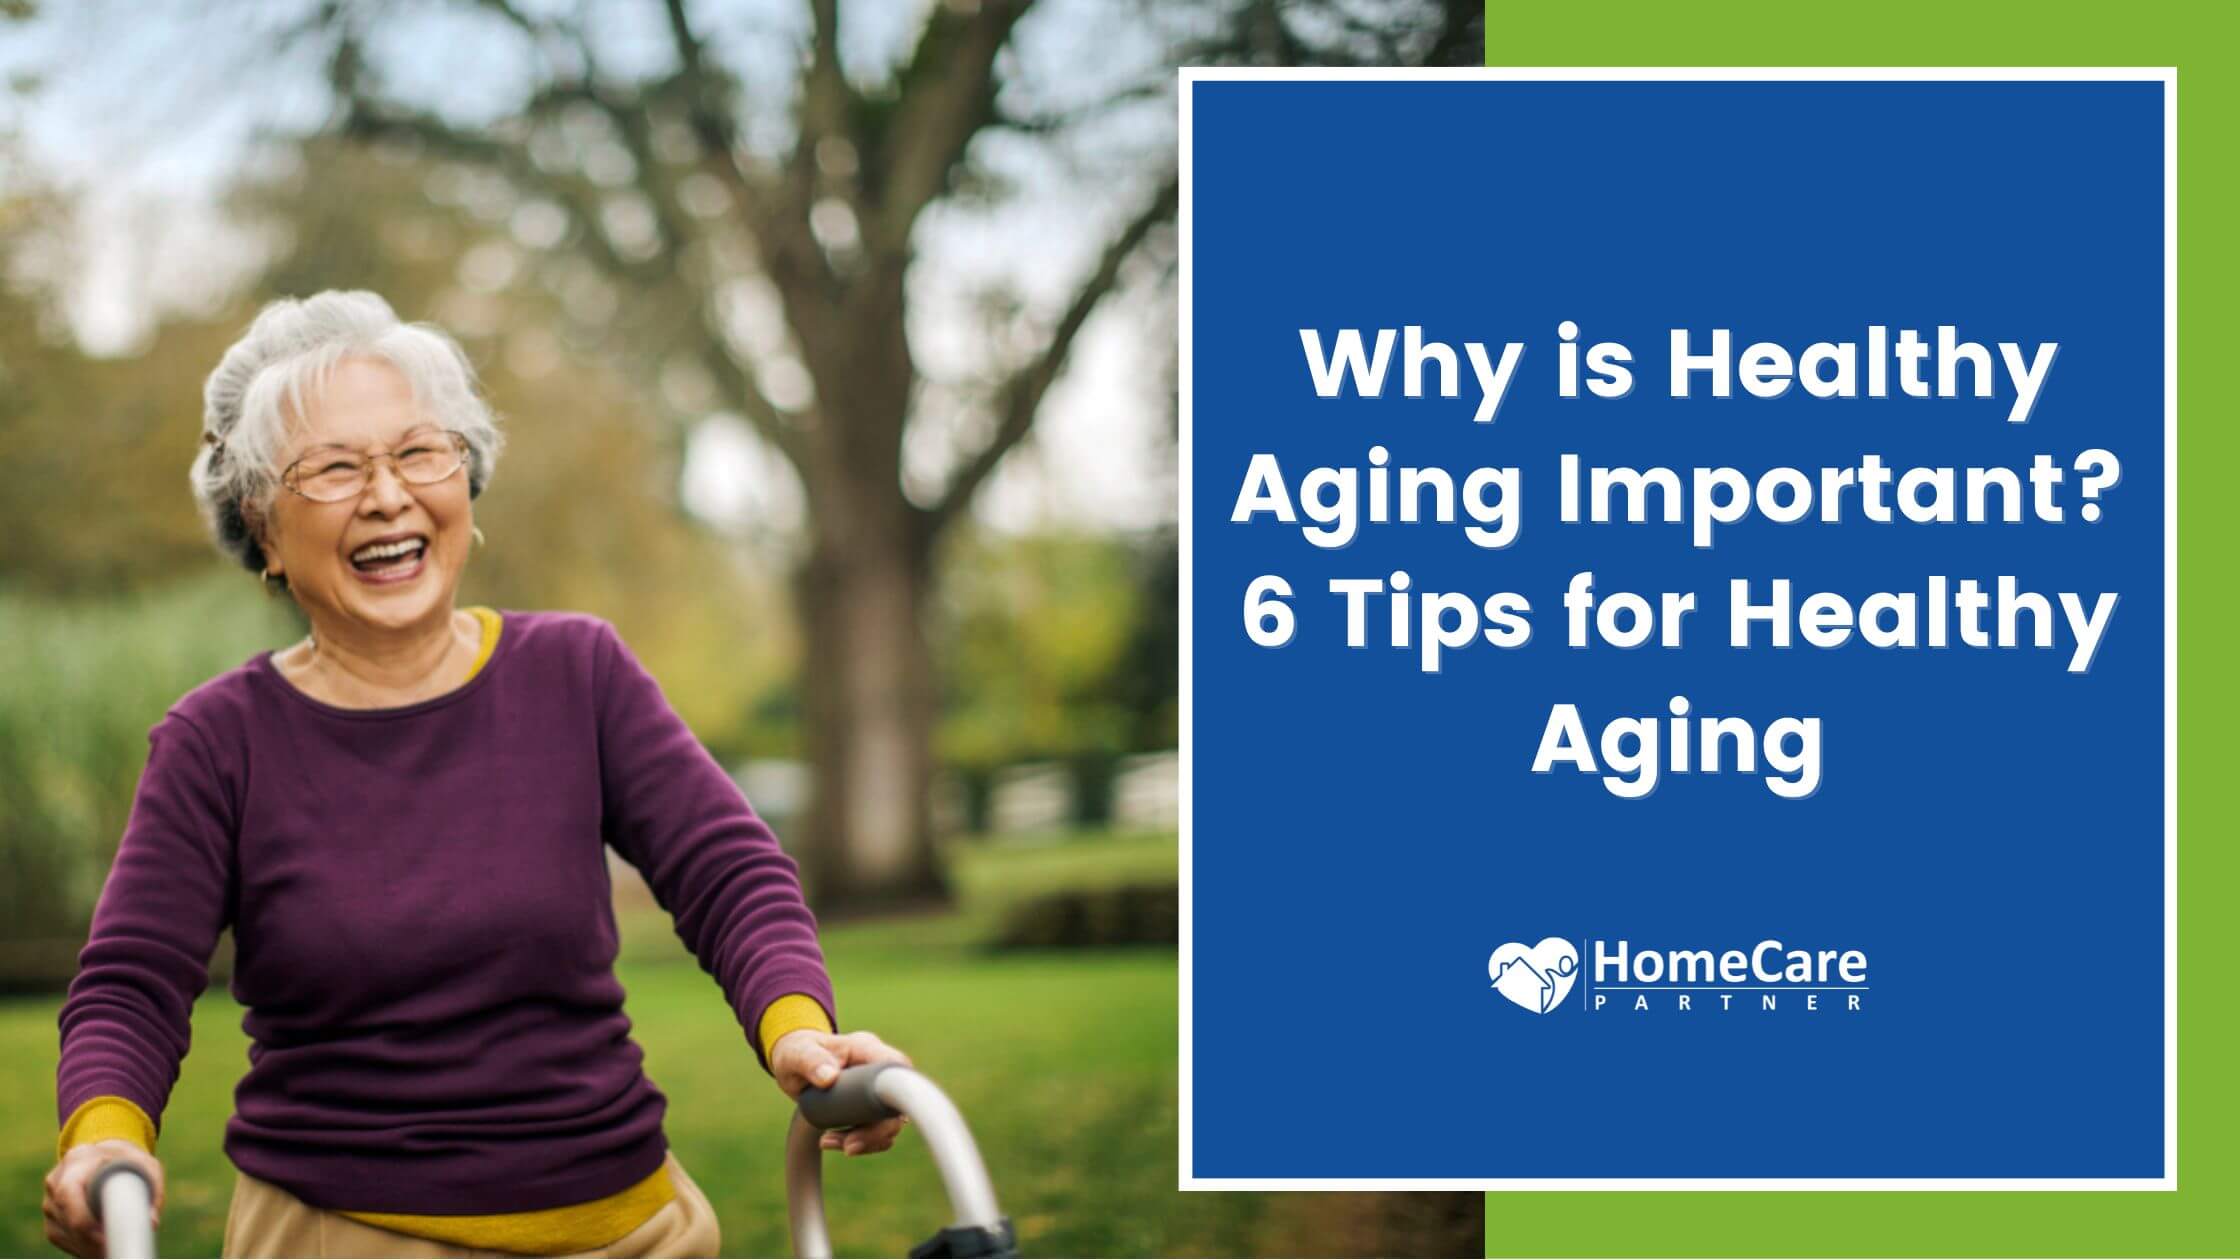  Why is Healthy Aging Important? 6 Tips for Healthy Aging